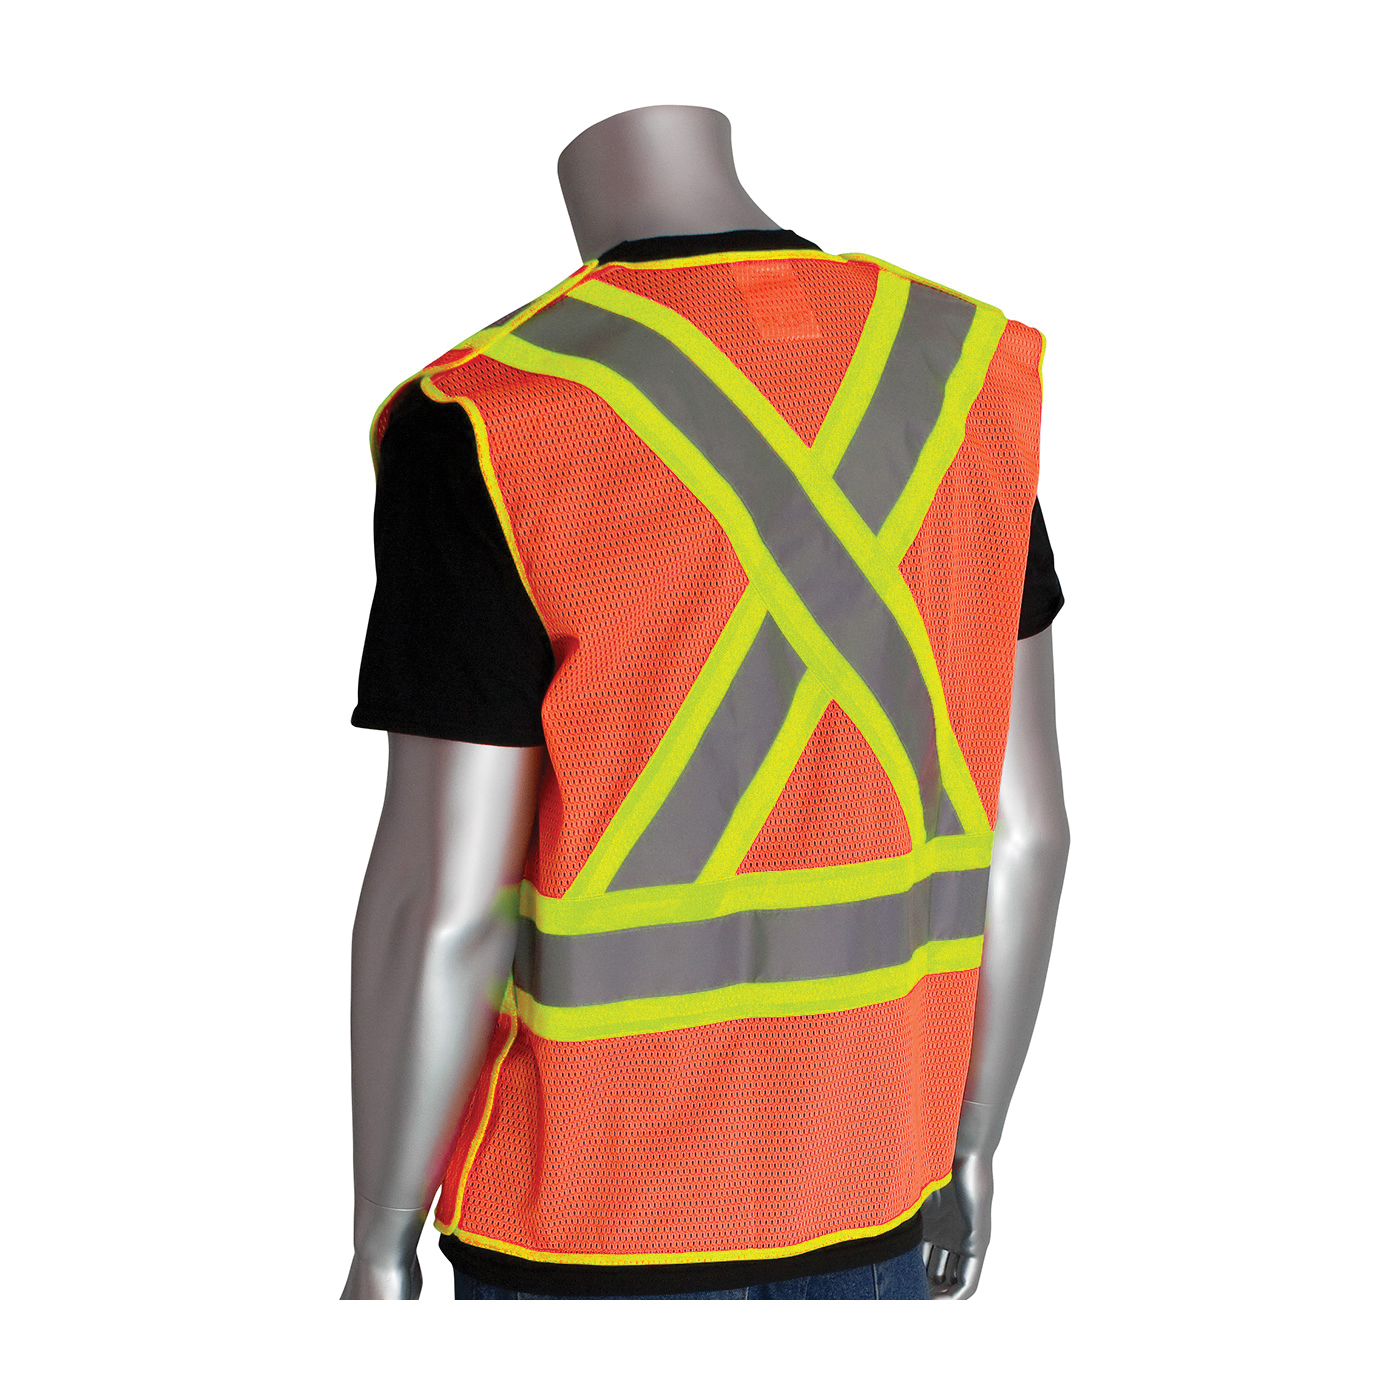 PIP® 302-0211-OR/3X 2-Tone X-Back Safety Vest, 3XL, Hi-Viz Orange, Polyester Mesh, Hook and Loop Closure, 5 Pockets, ANSI Class: Class 2, Specifications Met: ANSI 107 Type R, CAN/CSA Z96